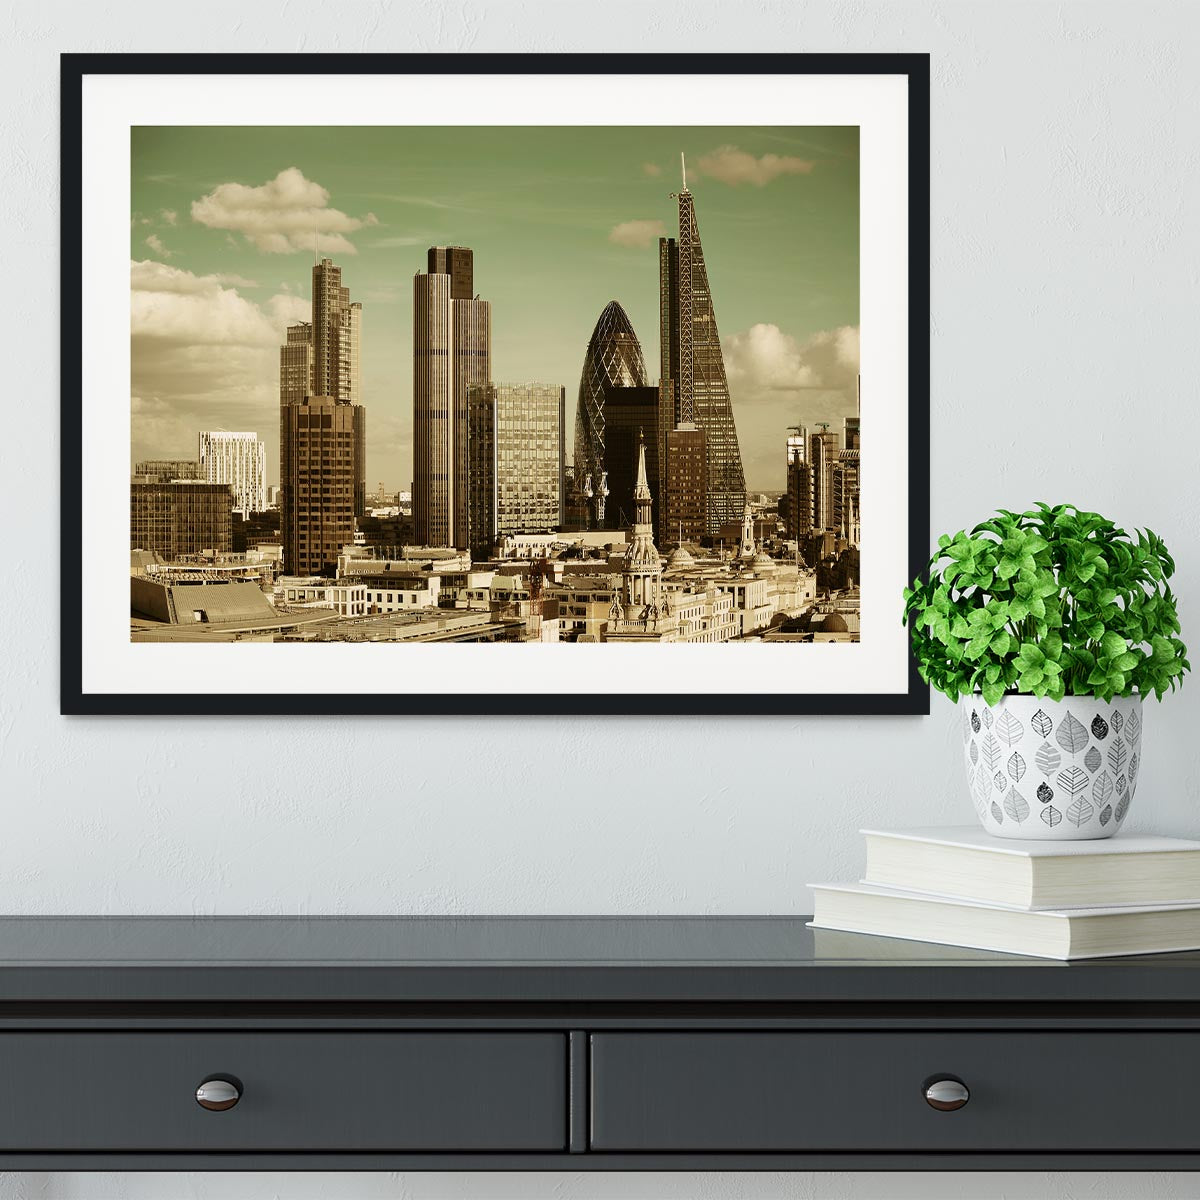 London city rooftop view with urban architectures Framed Print - Canvas Art Rocks - 1